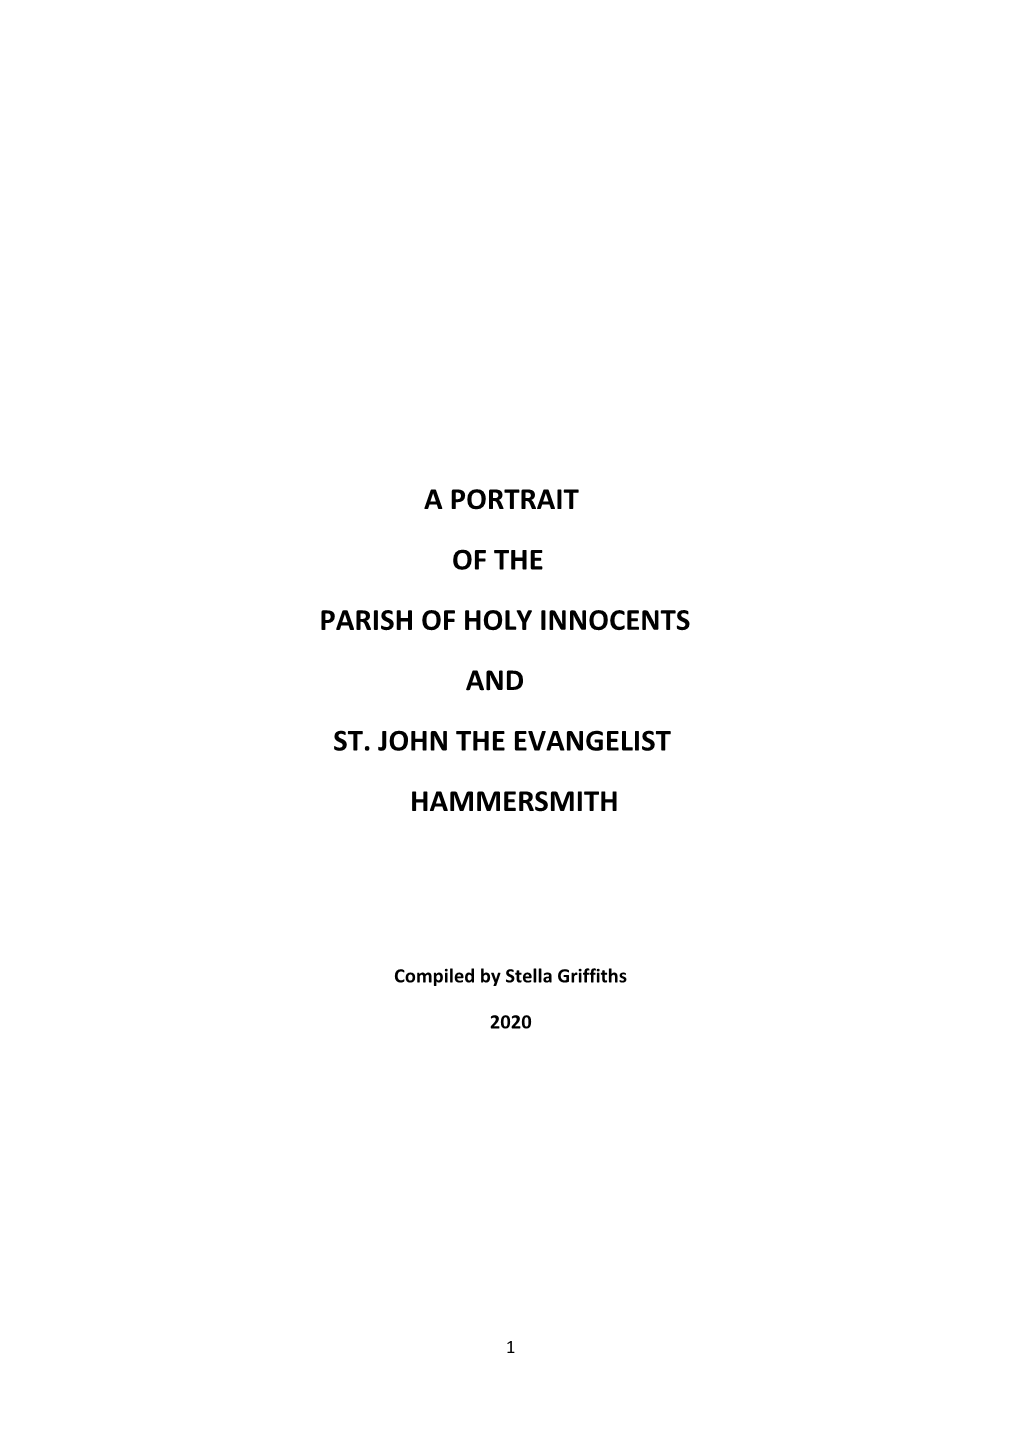 A Portrait of the Parish of Holy Innocents and St. John the Evangelist Hammersmith